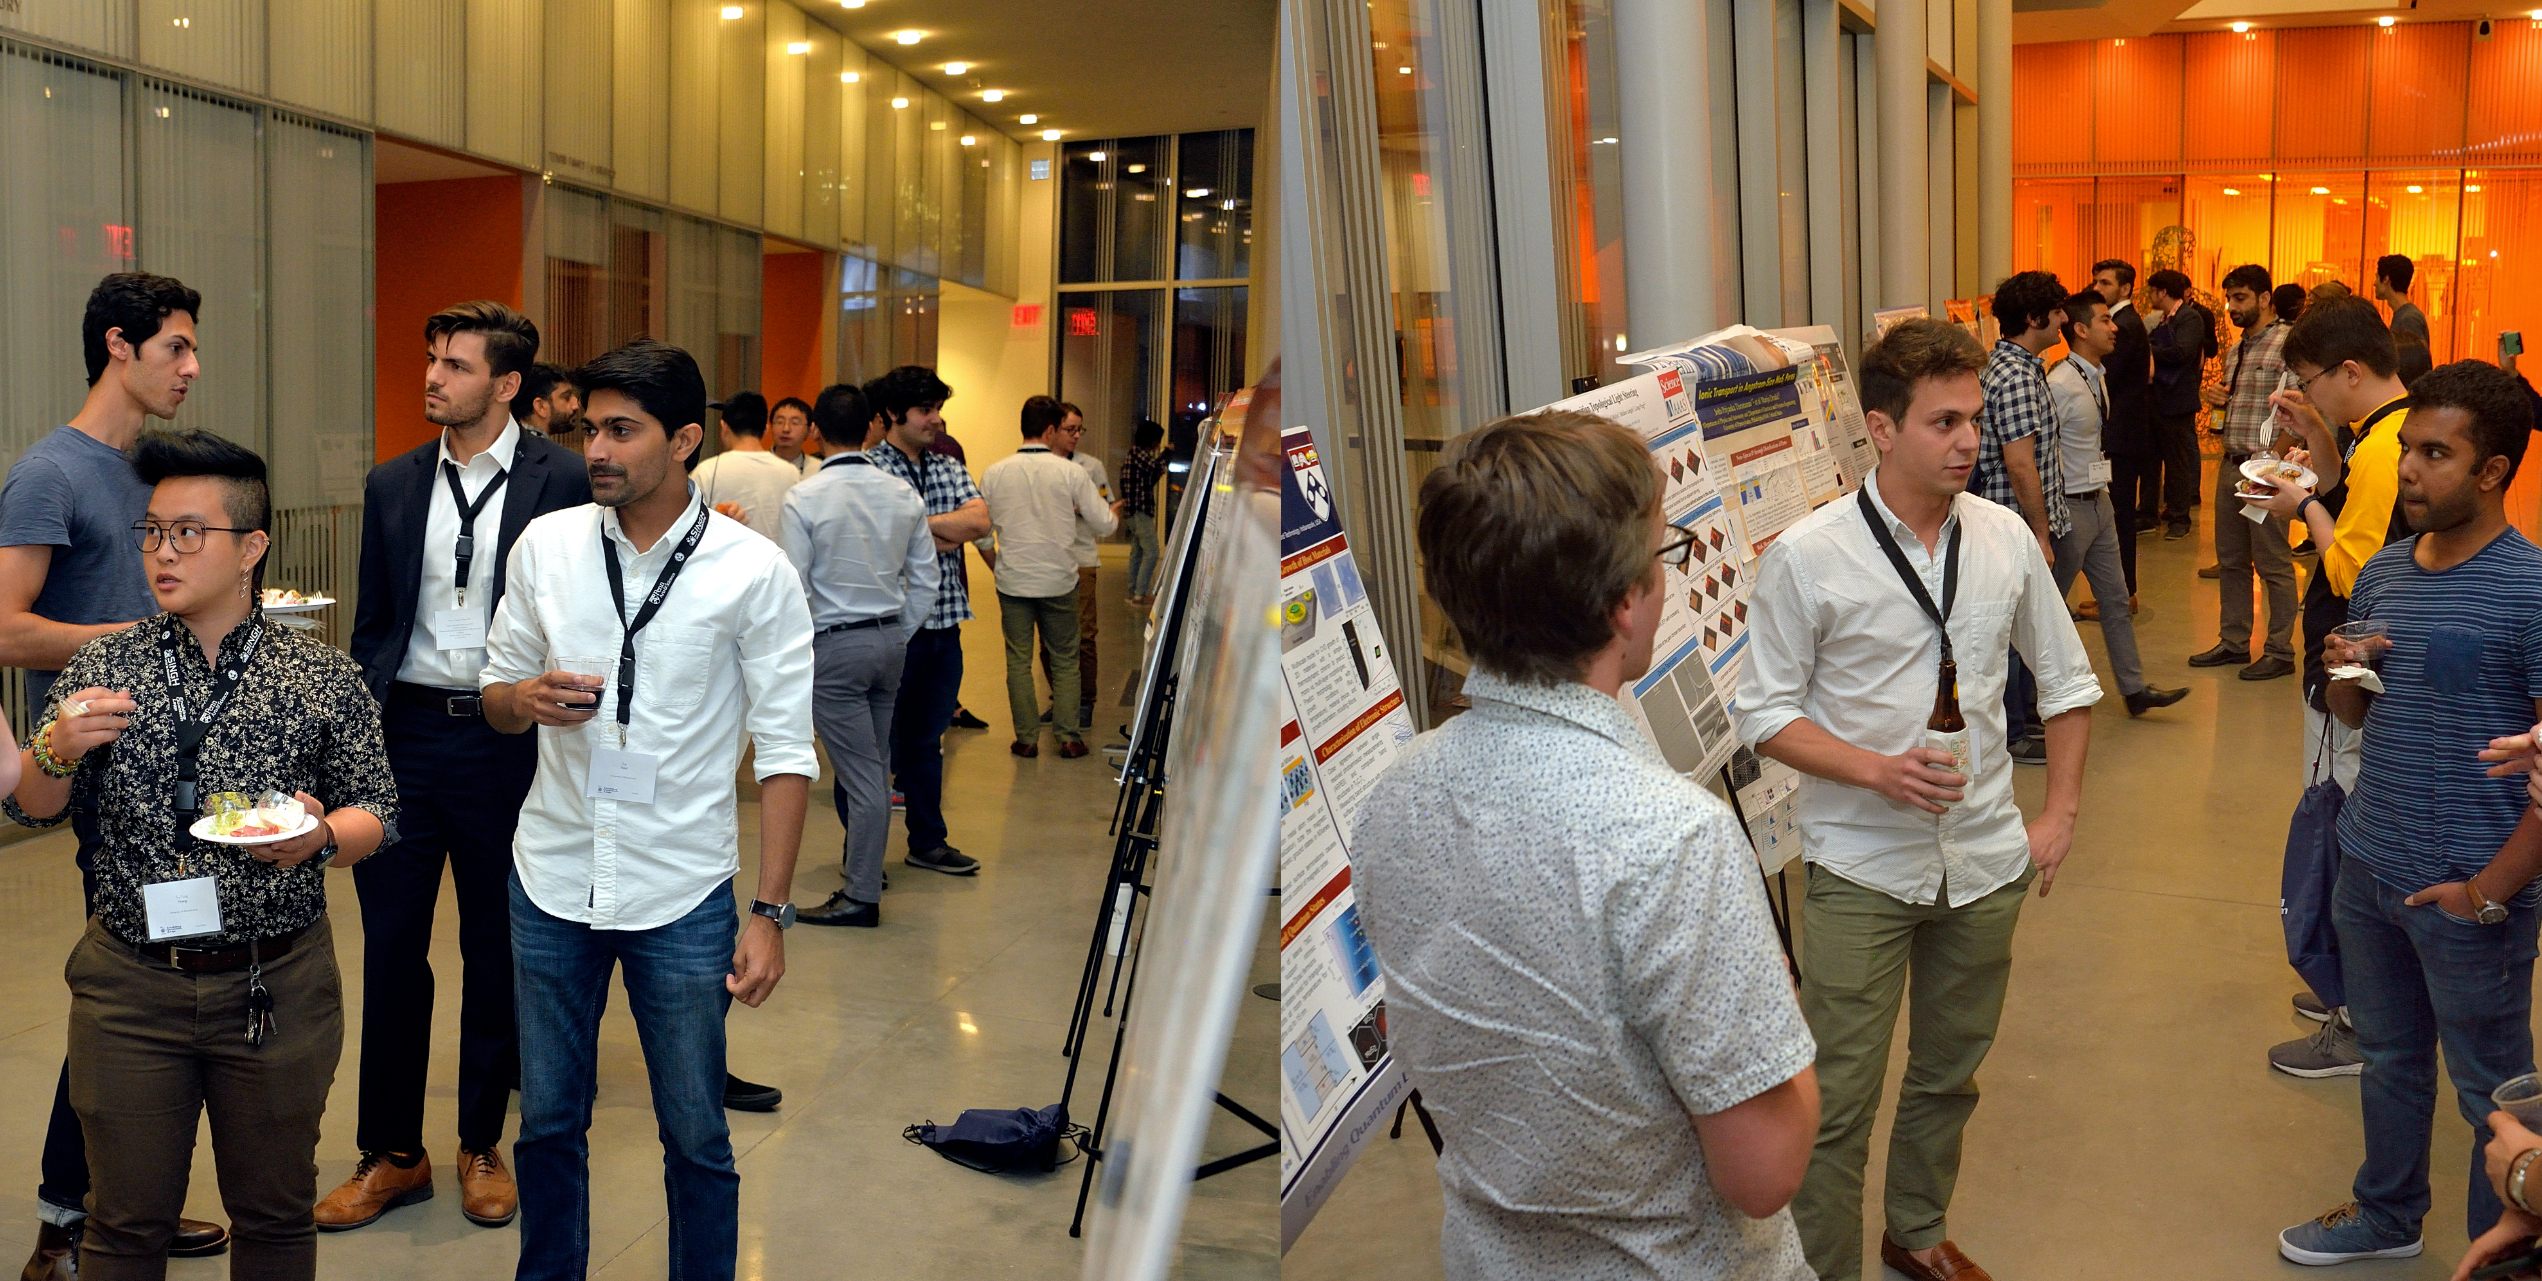 people standing in front of poster-boards in a hallway of a modern building